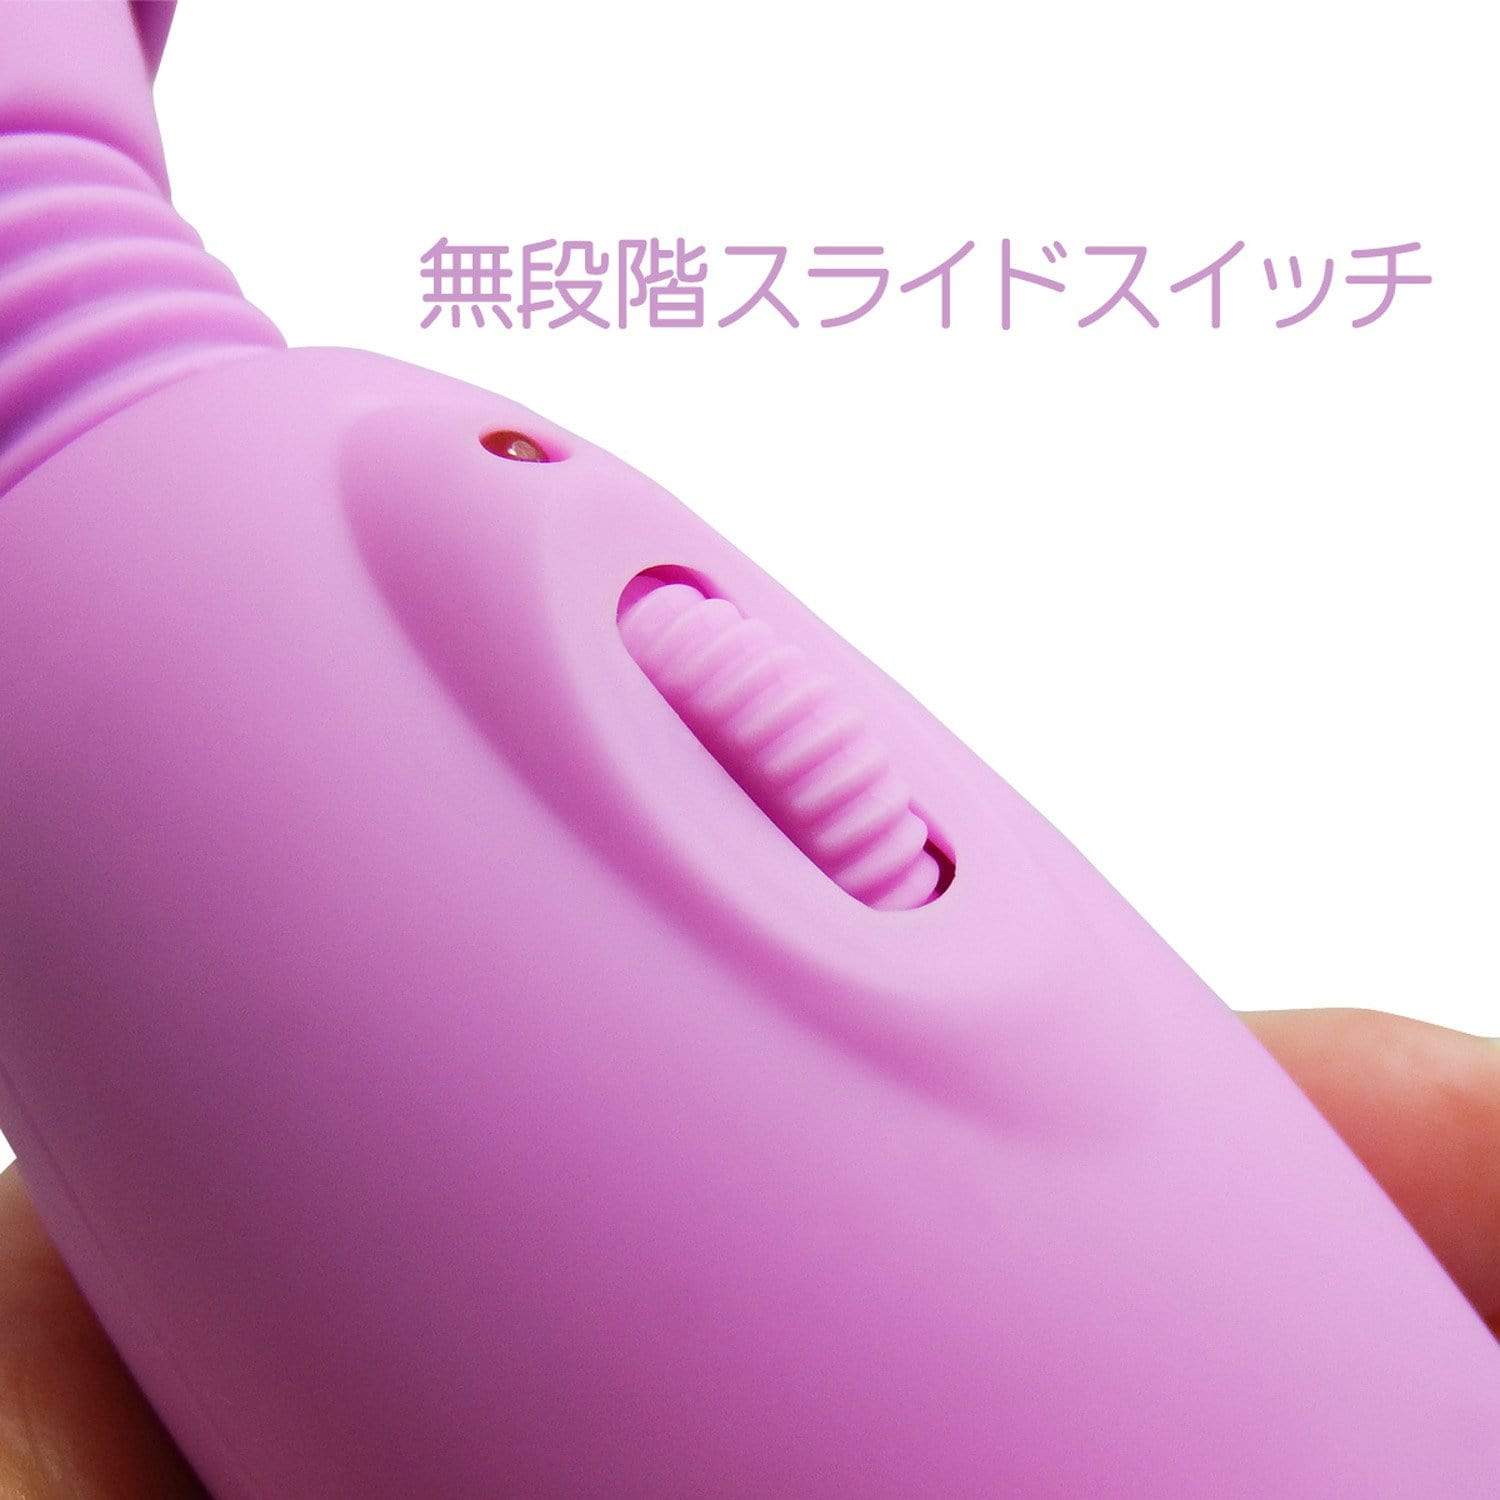 Wild One - Pink Denma CC2 Wand Massager (Purple) -  Wand Massagers (Vibration) Non Rechargeable  Durio.sg